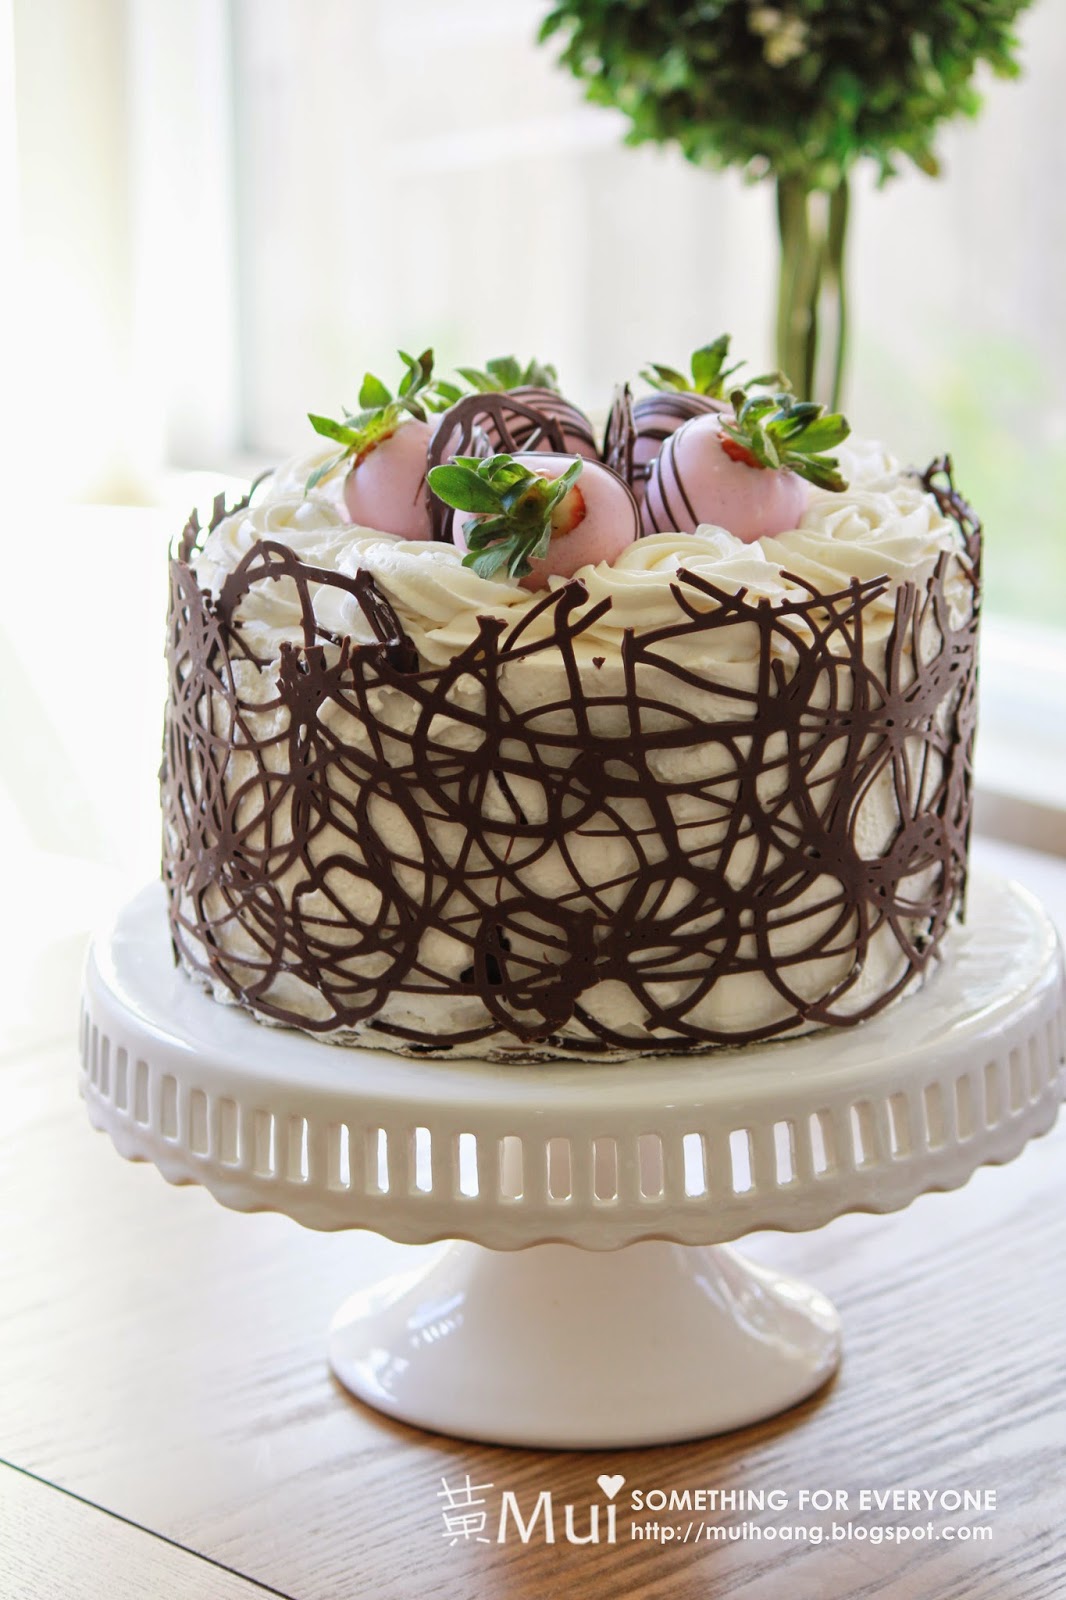 Something for Everyone!: Chocolate Cage Strawberry Cake